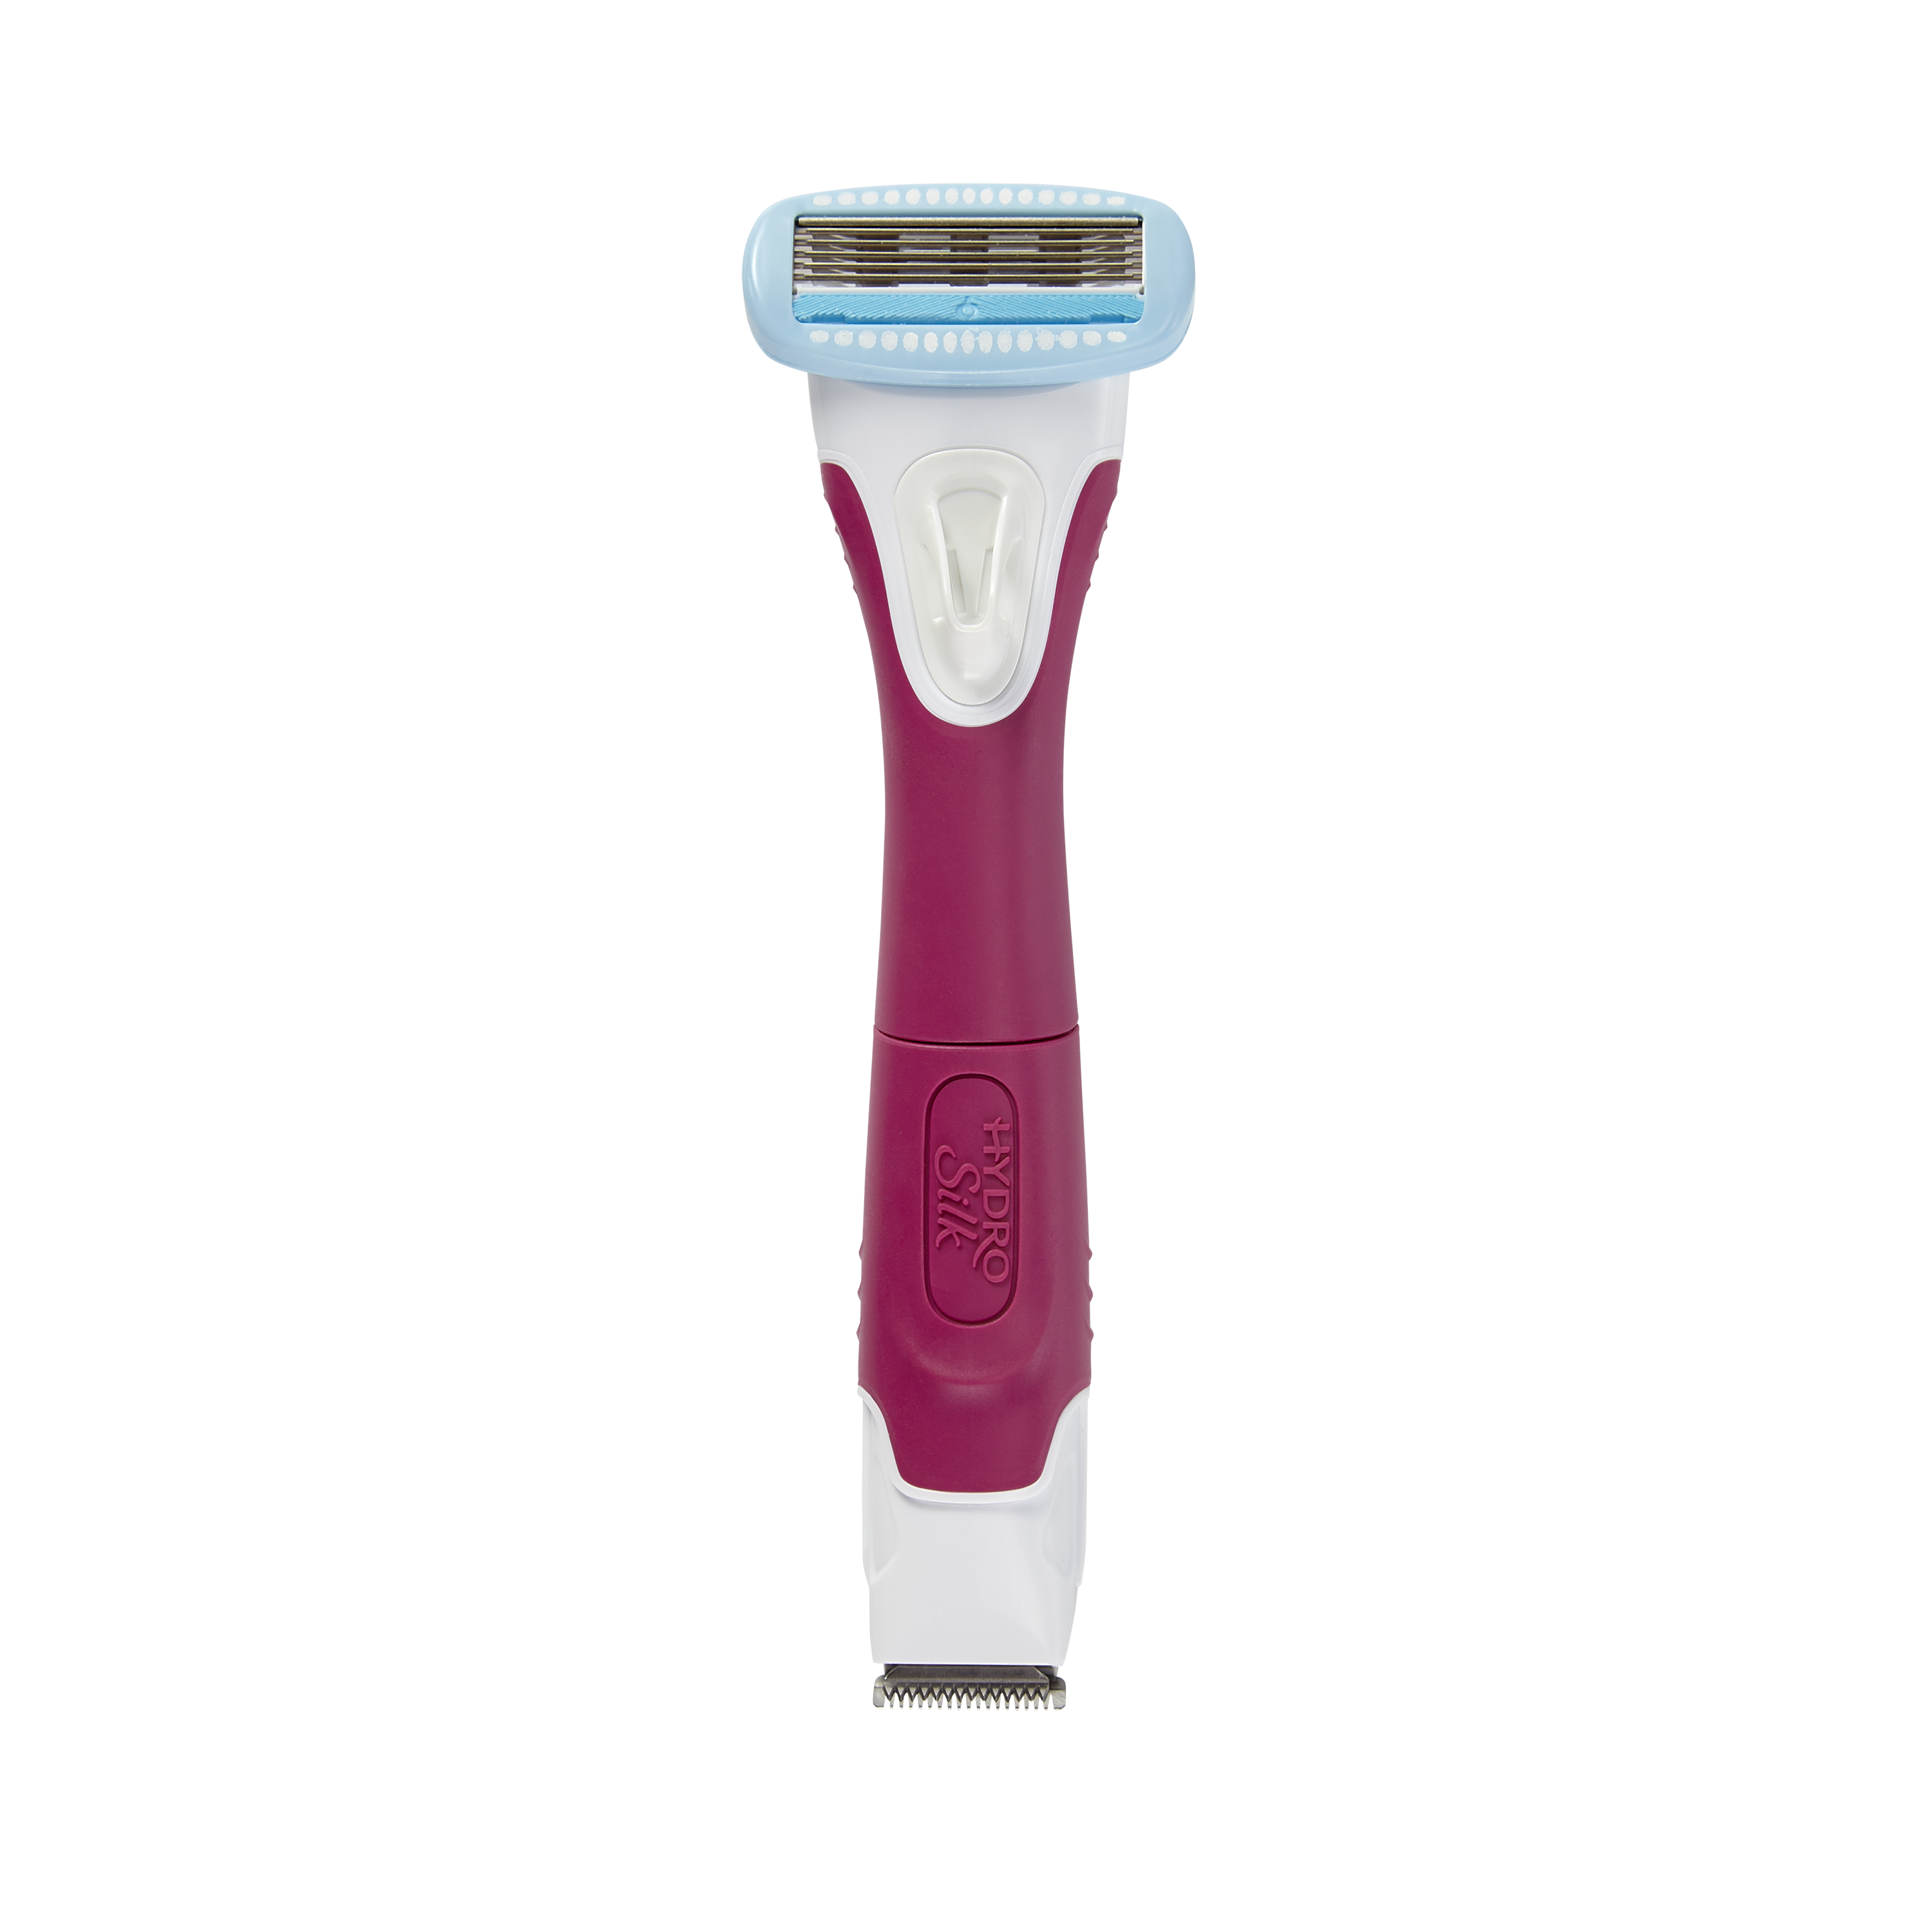 Hydrating razor and waterproof bikini trimmer in one convenient product.